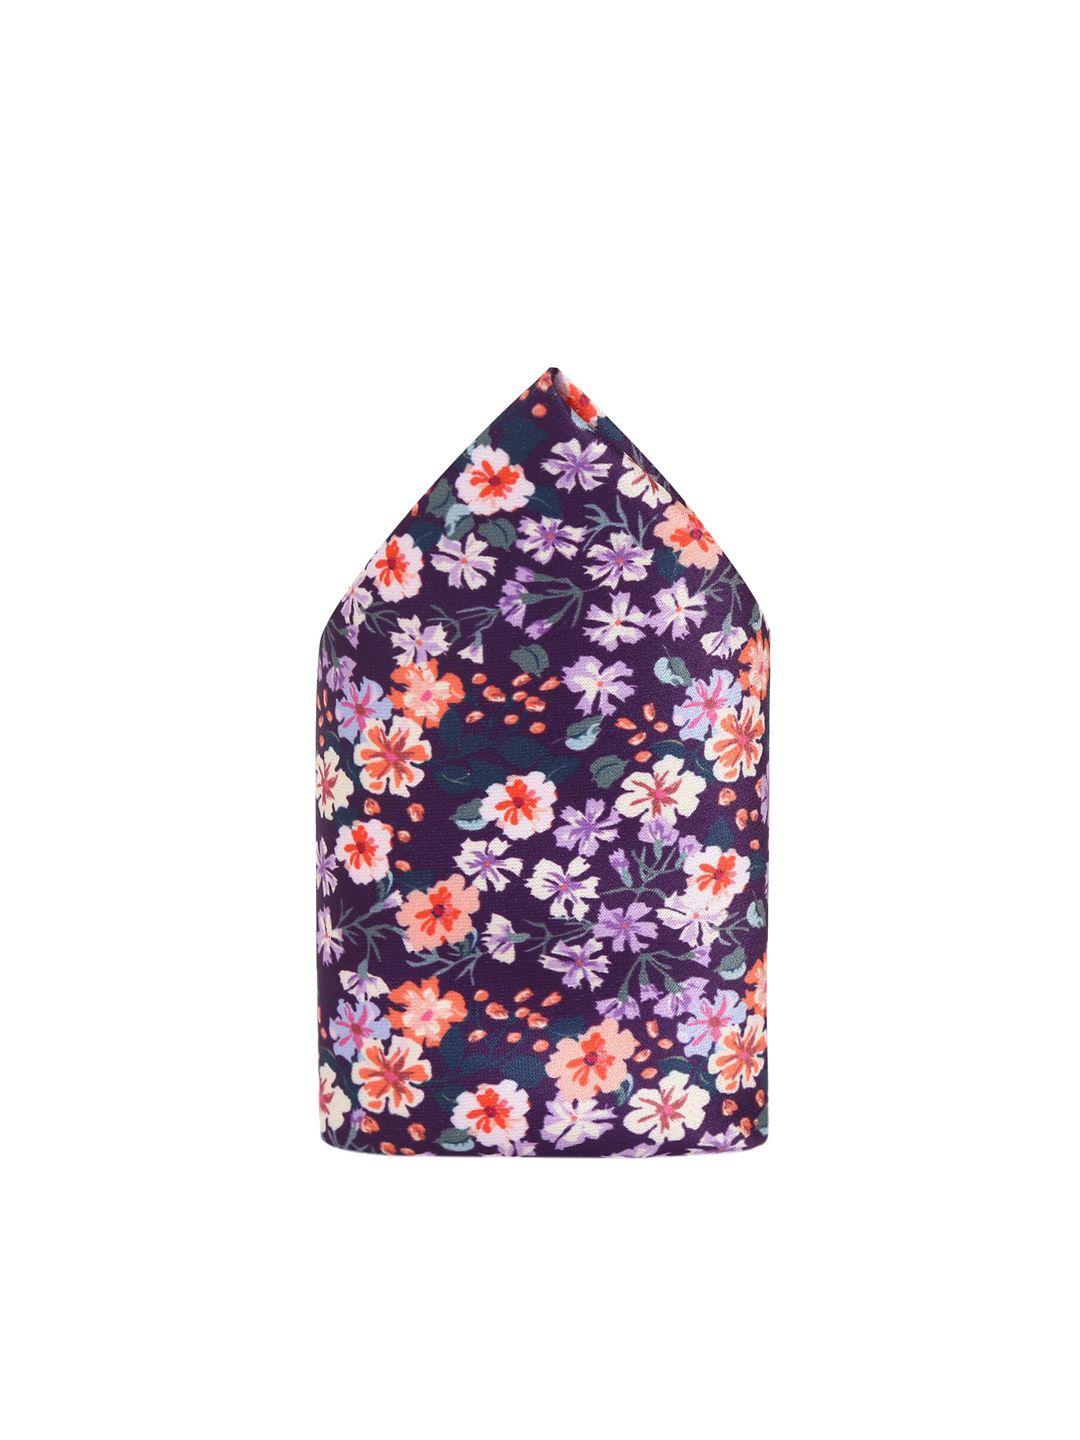 tossido men purple & orange floral printed pocket square with a gift box